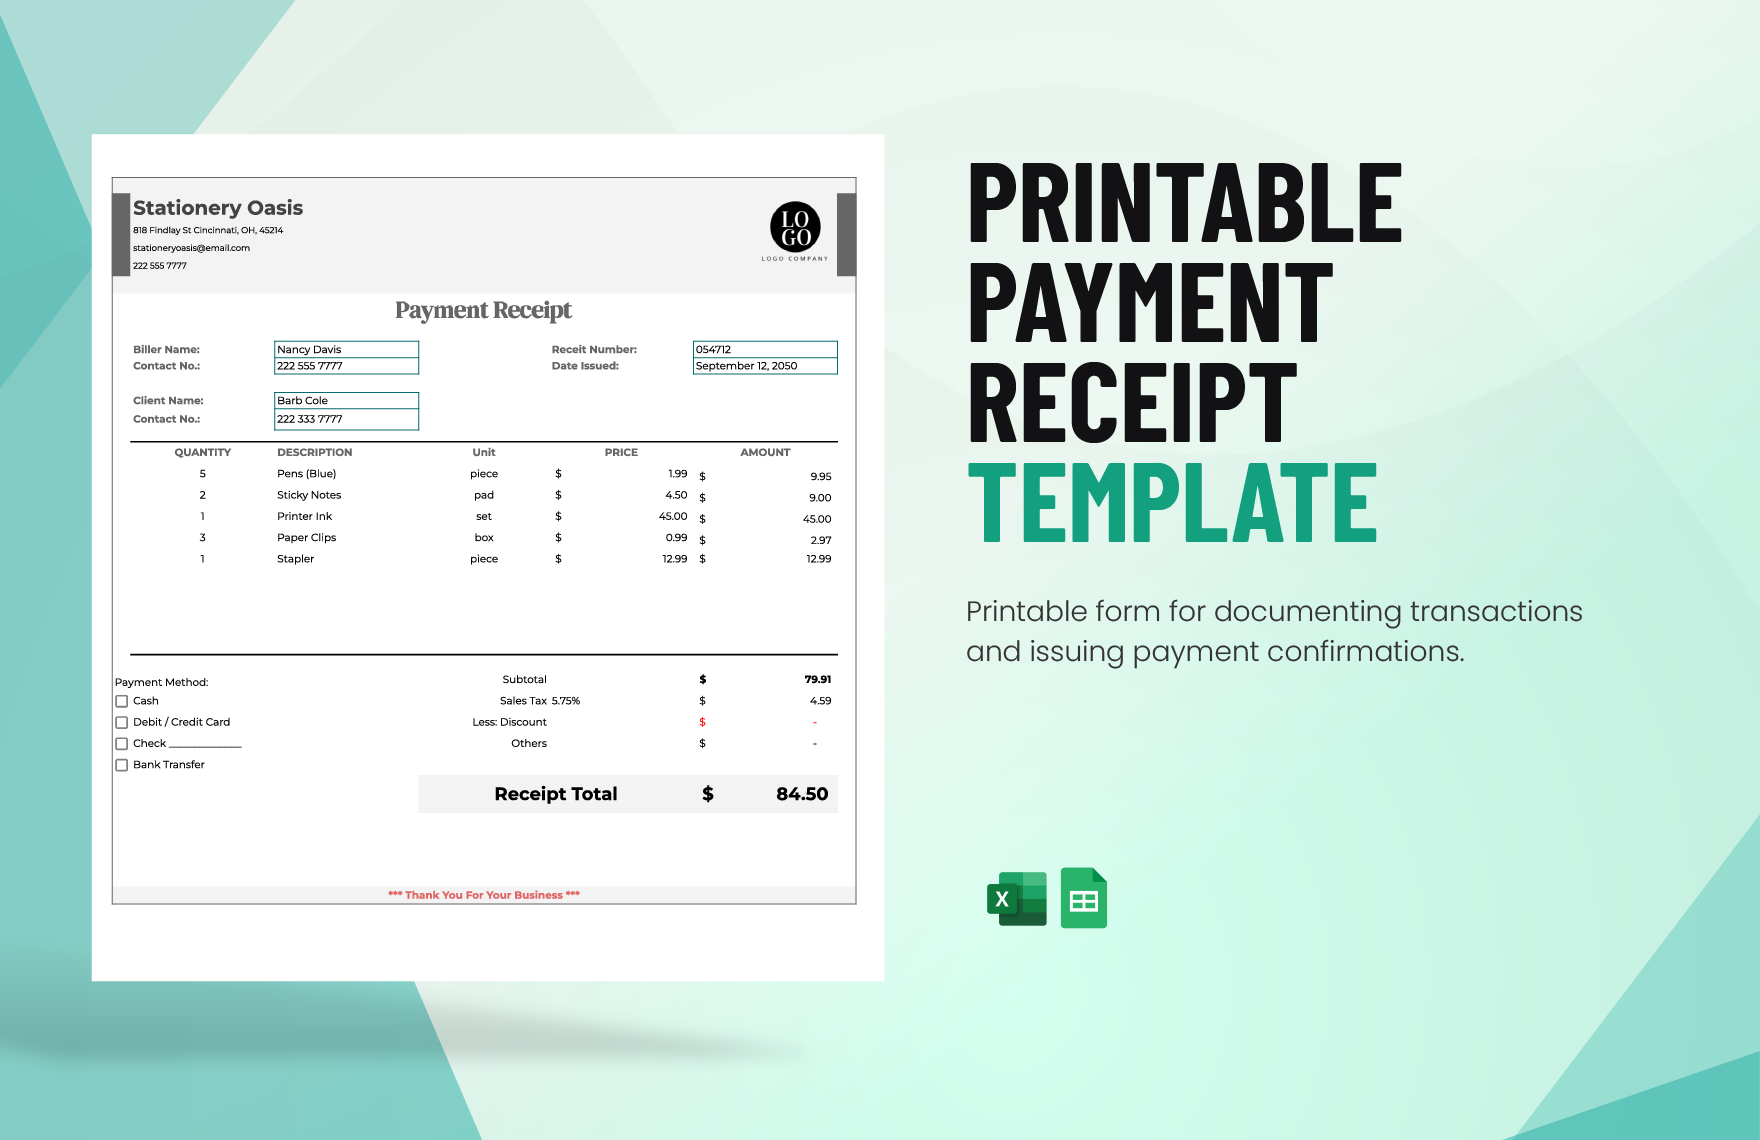 Printable Payment Receipt Template in Excel, Google Sheets